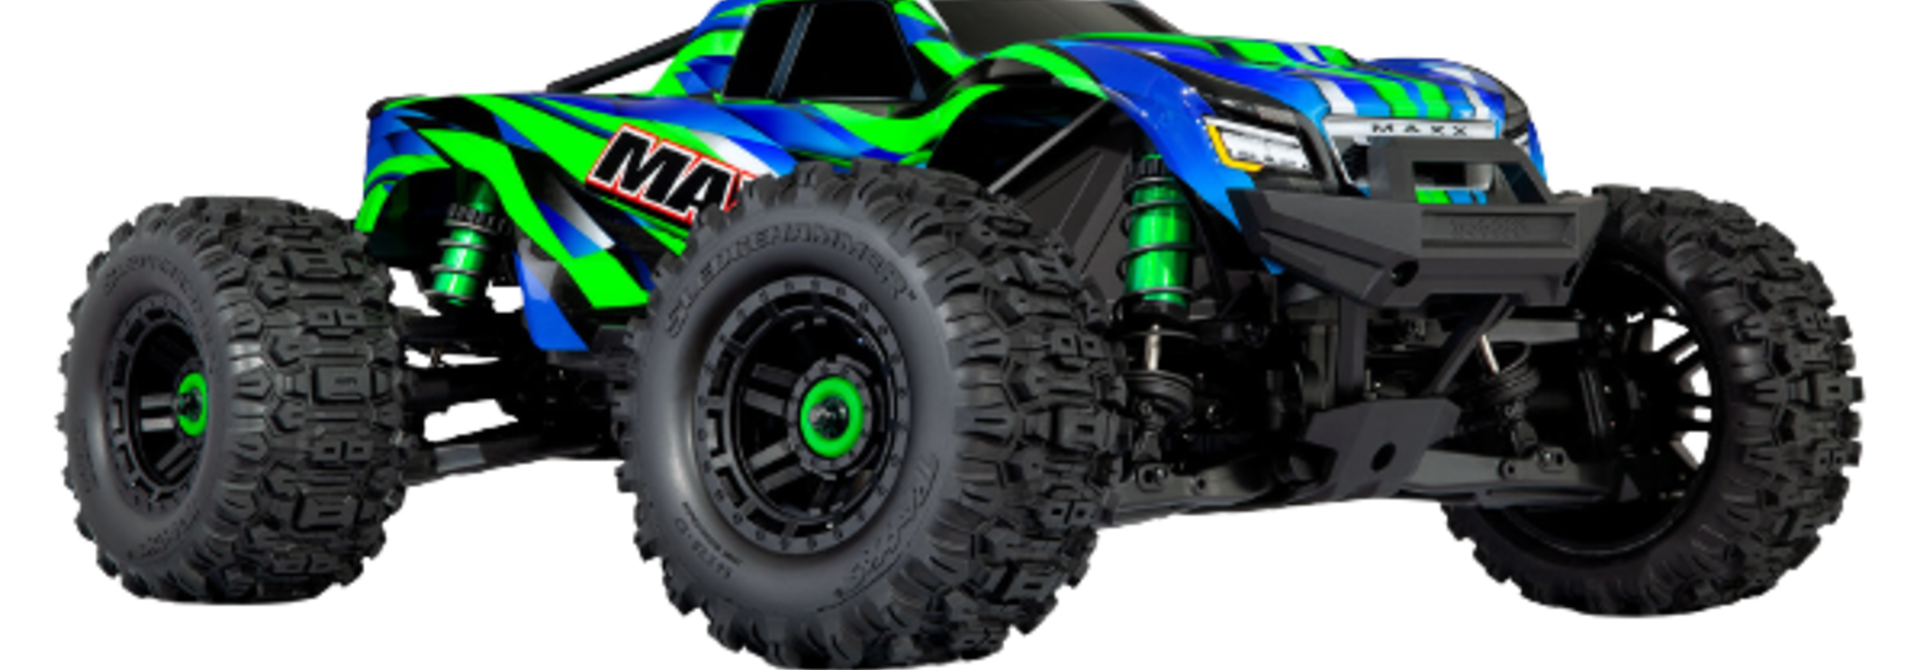 Traxxas Wide Maxx 1/10 Scale 4WD Brushless truck Green TRX89086-4GRN